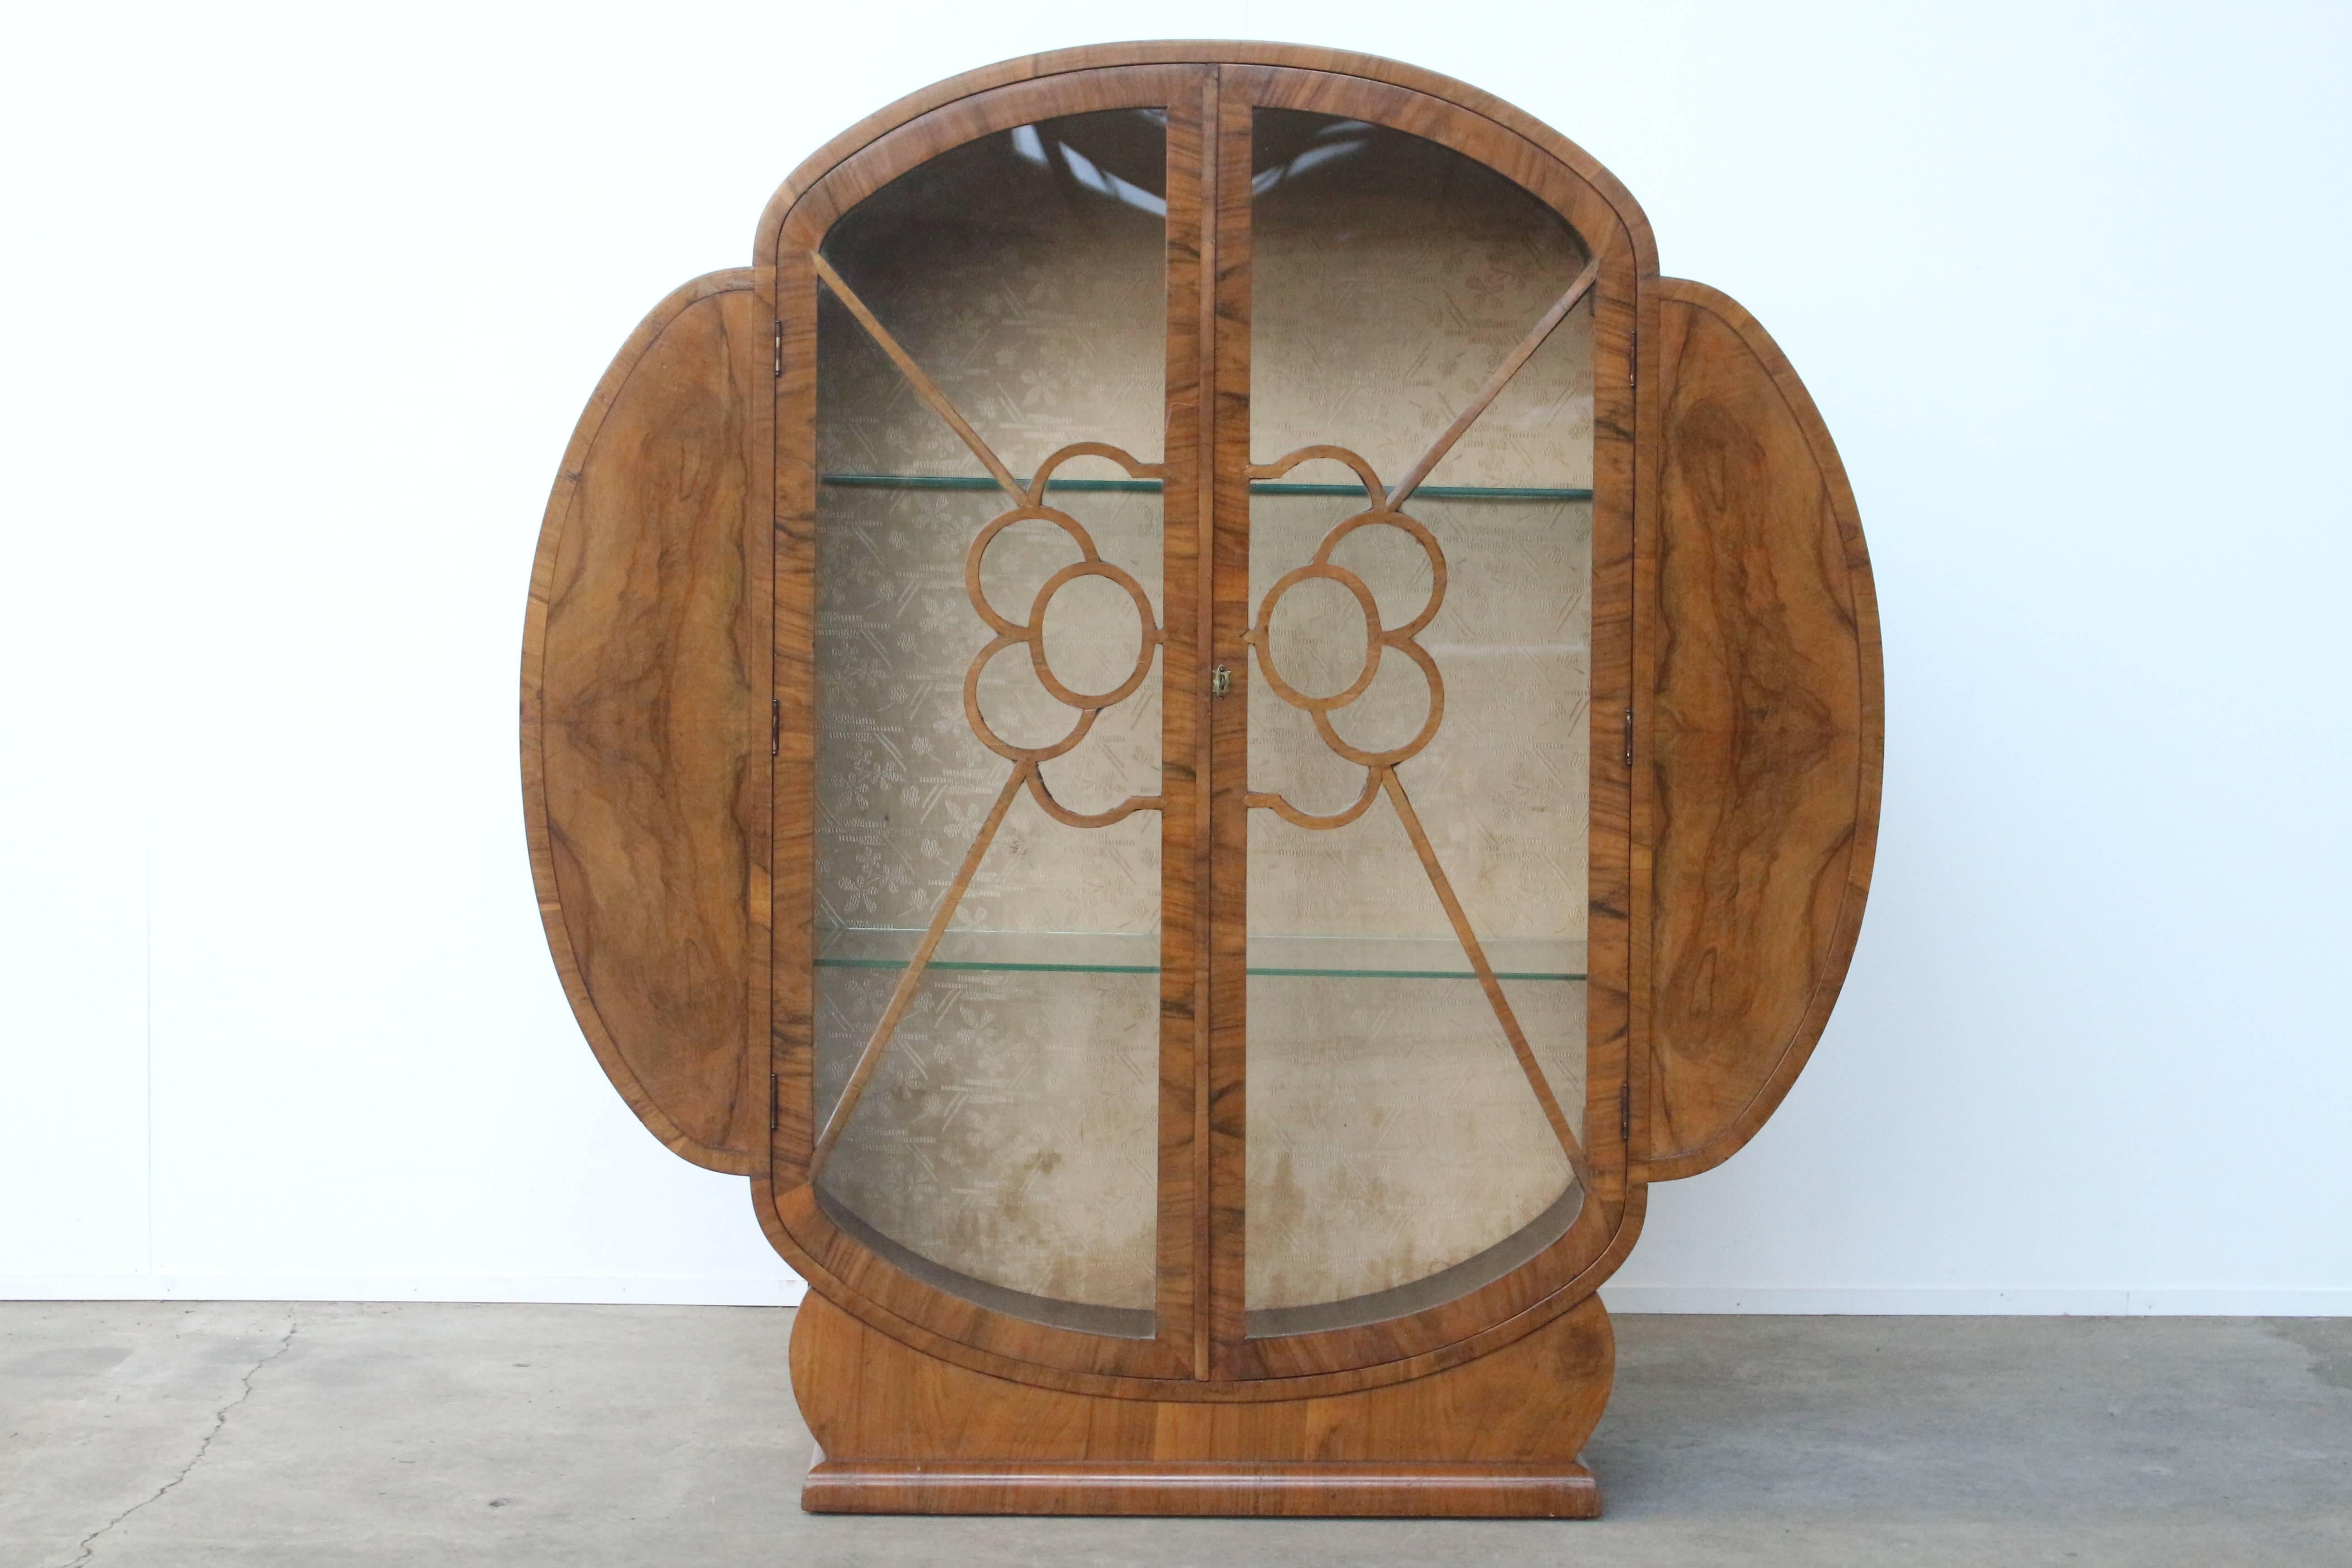 Stunning circular art-deco display cabinet in walnut with three glass shelves. The astragal doors show a beautiful cloud-shaped pattern and all the details are truly master crafted. The interior features the original silk showing a floral,